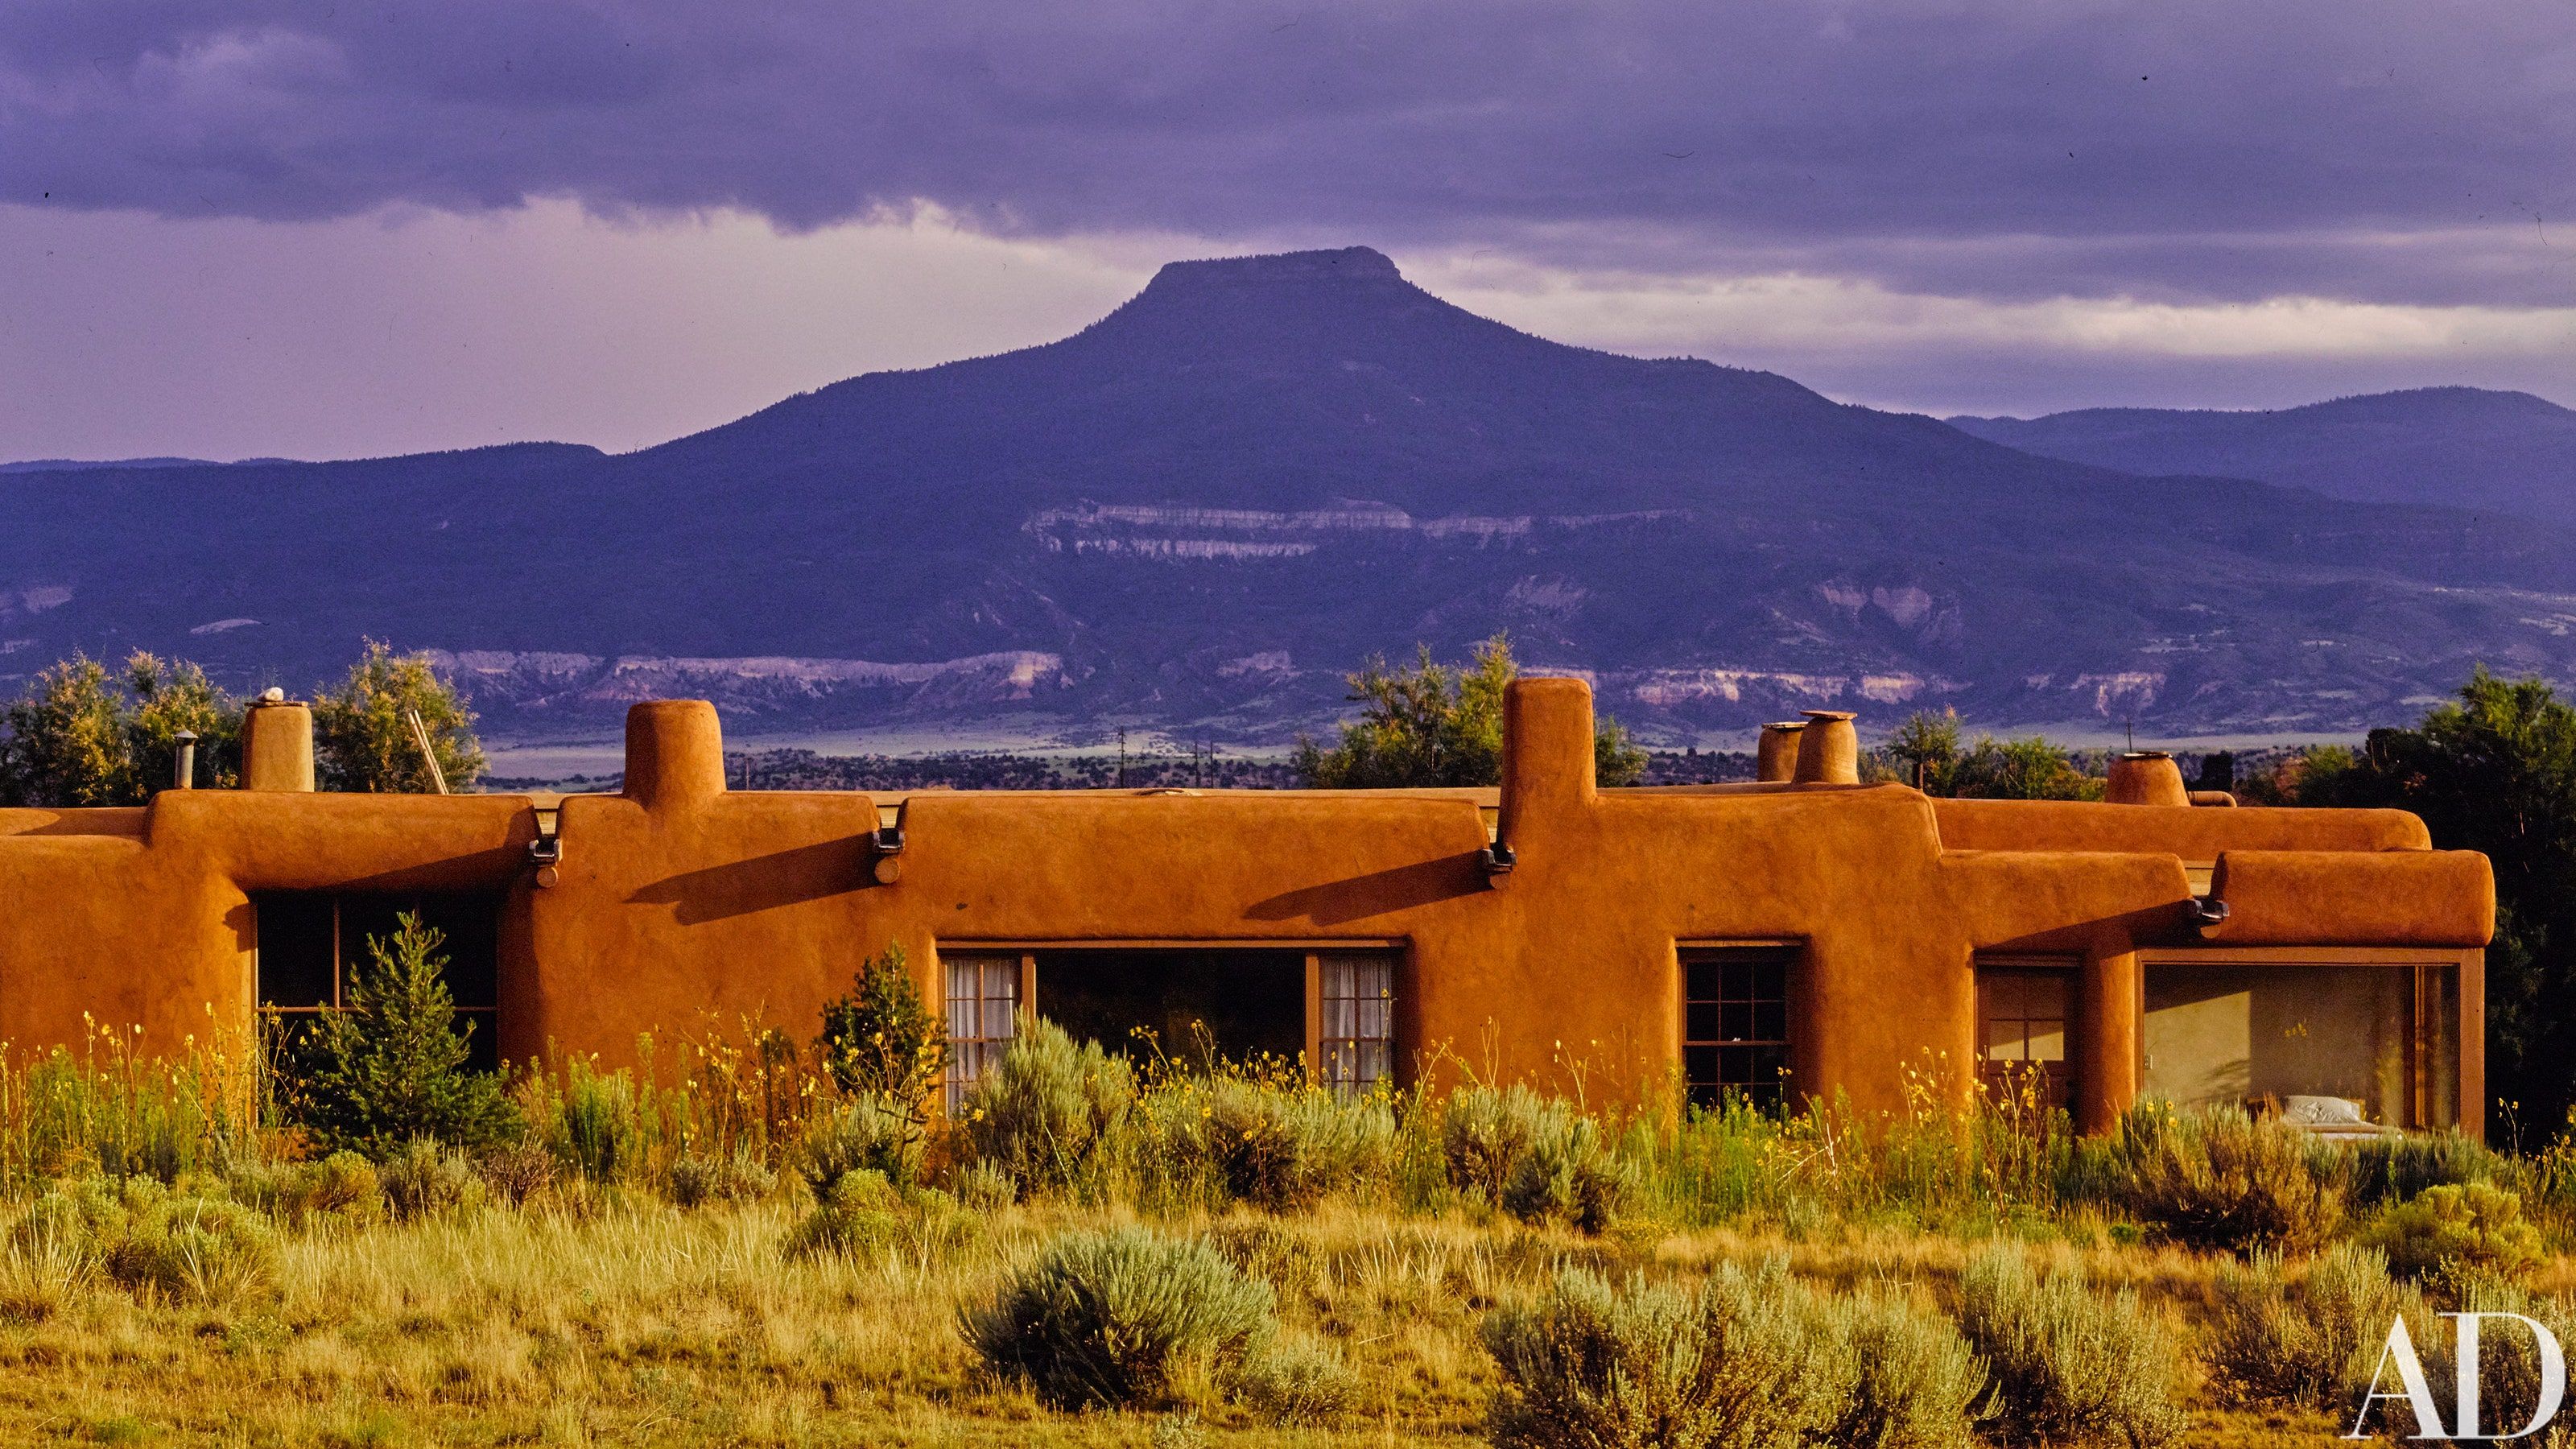 Georgia O'Keeffe's House in New Mexico